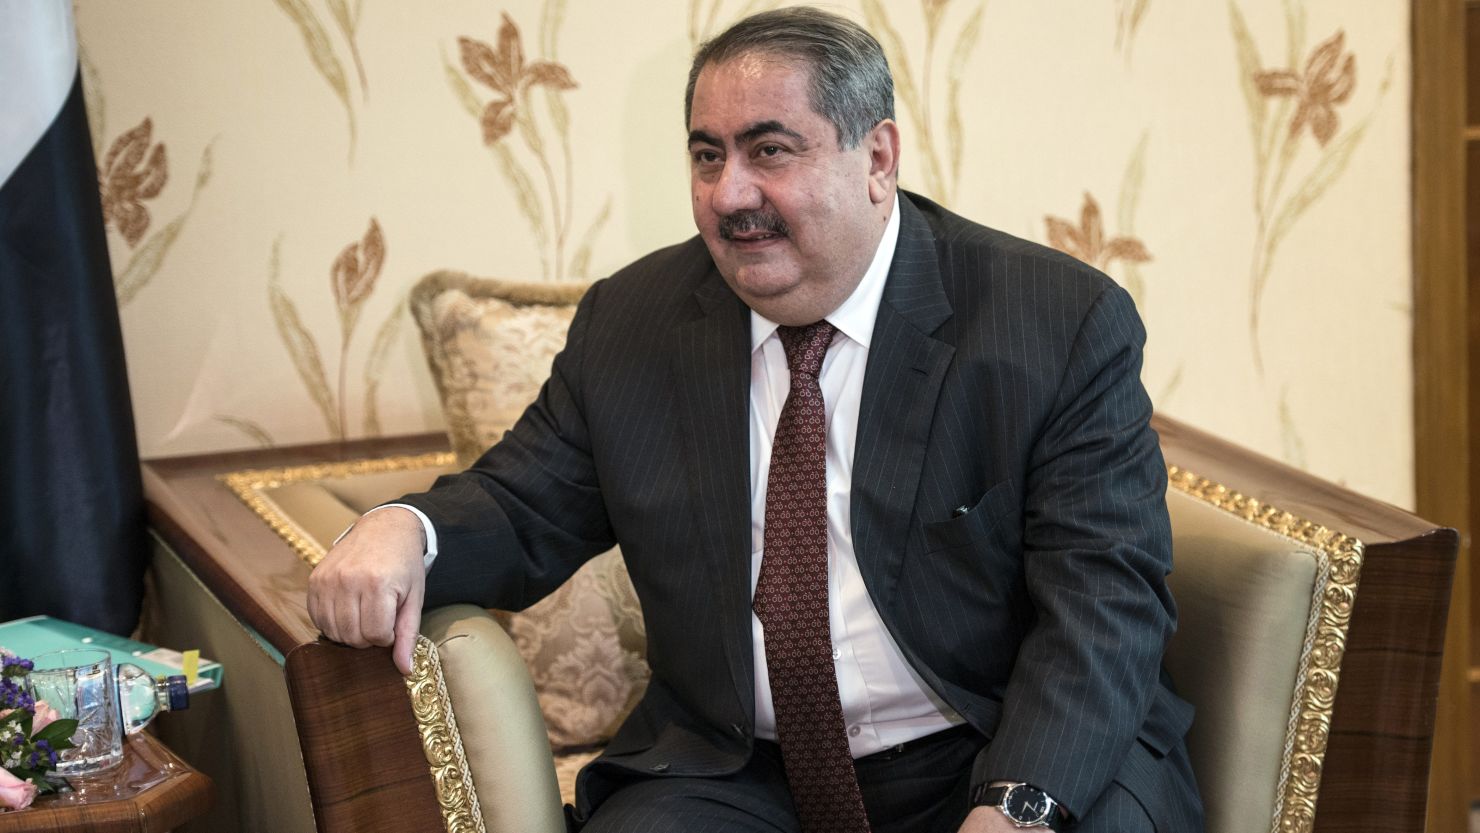 Hoshyar Zebari is shown in Baghdad on June 23. A Prime Minister's adviser will be interim foreign minister, officials say.